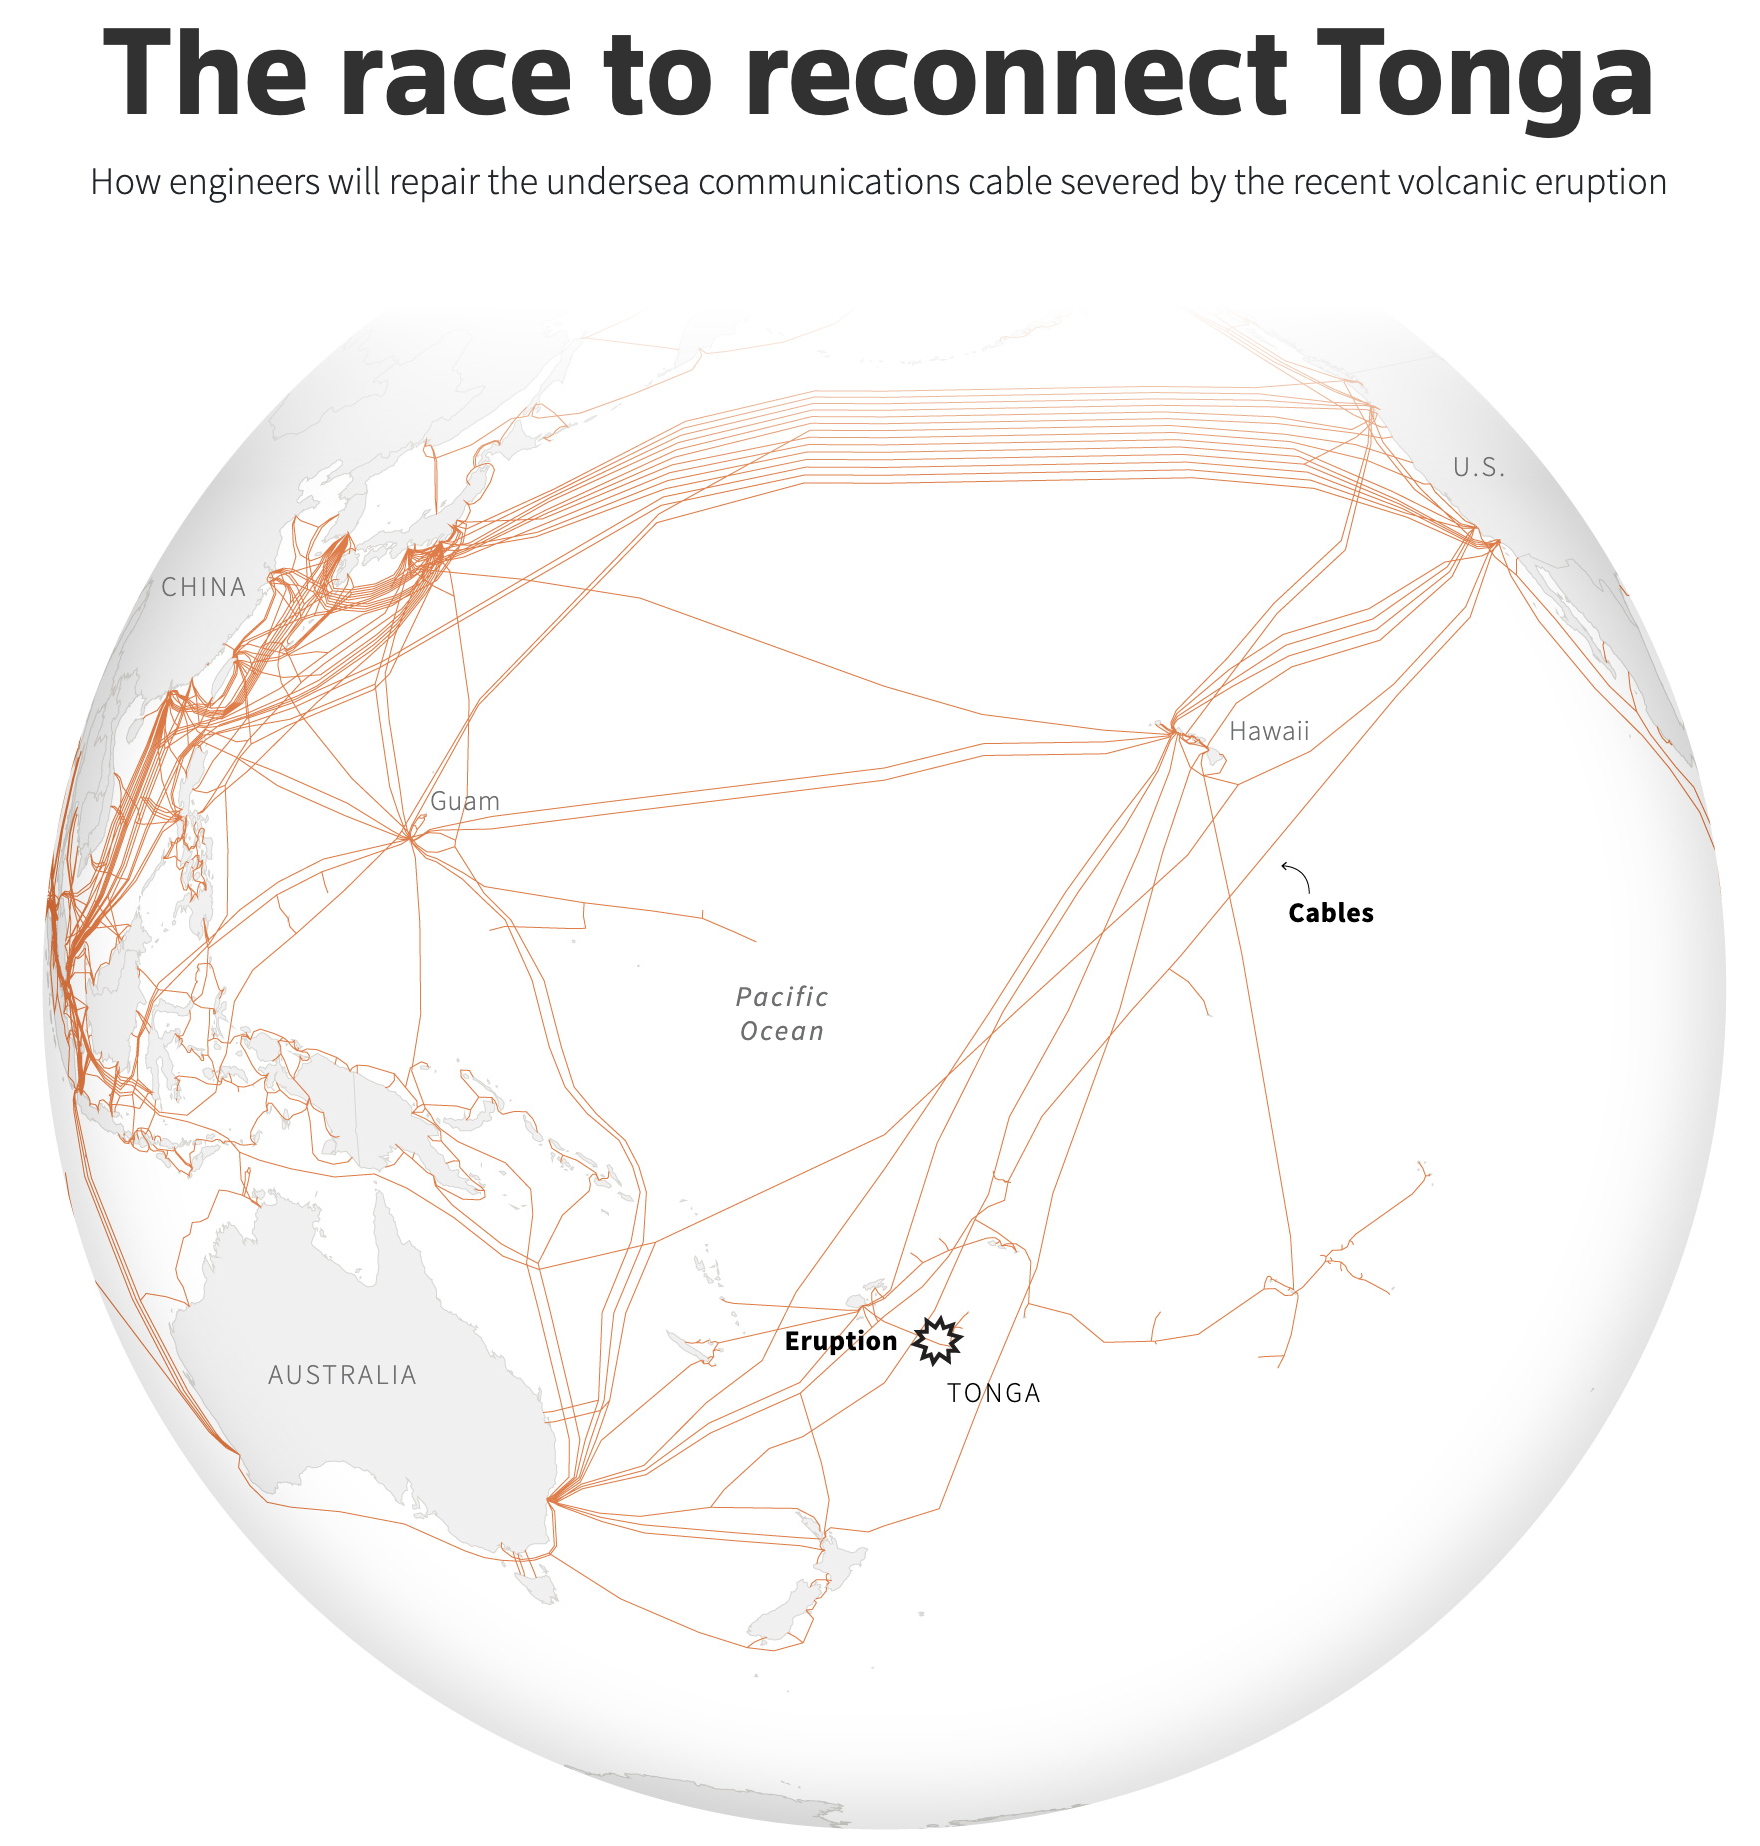 A map of undersea cables in the region of Tonga